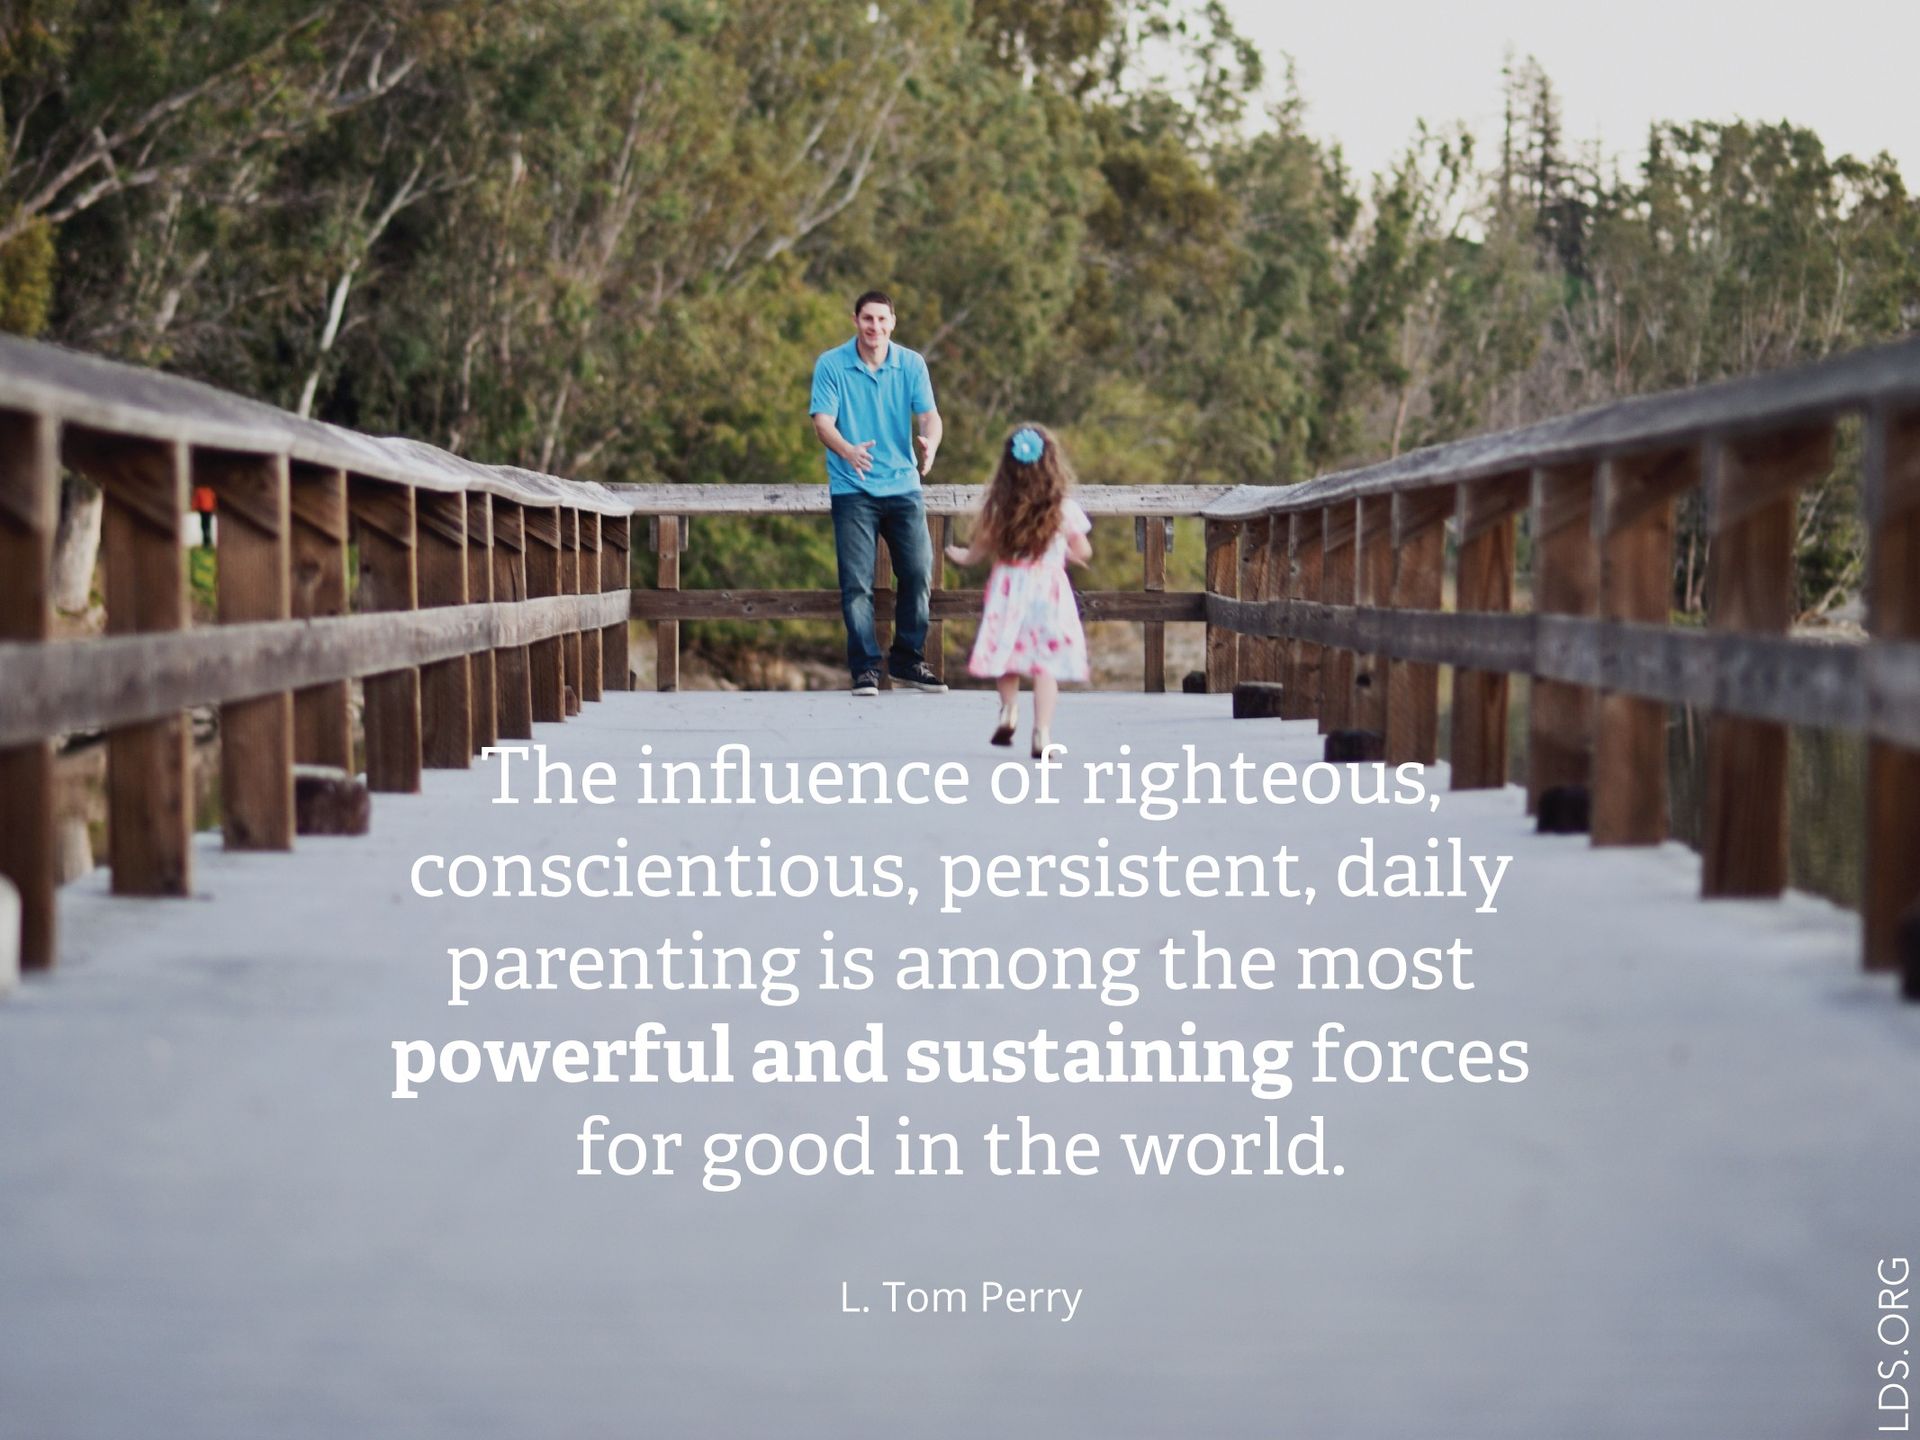 “The influence of righteous, conscientious, persistent, daily parenting is among the most powerful and sustaining forces for good in the world.” —Elder L. Tom Perry, “Mothers Teaching Children in the Home”